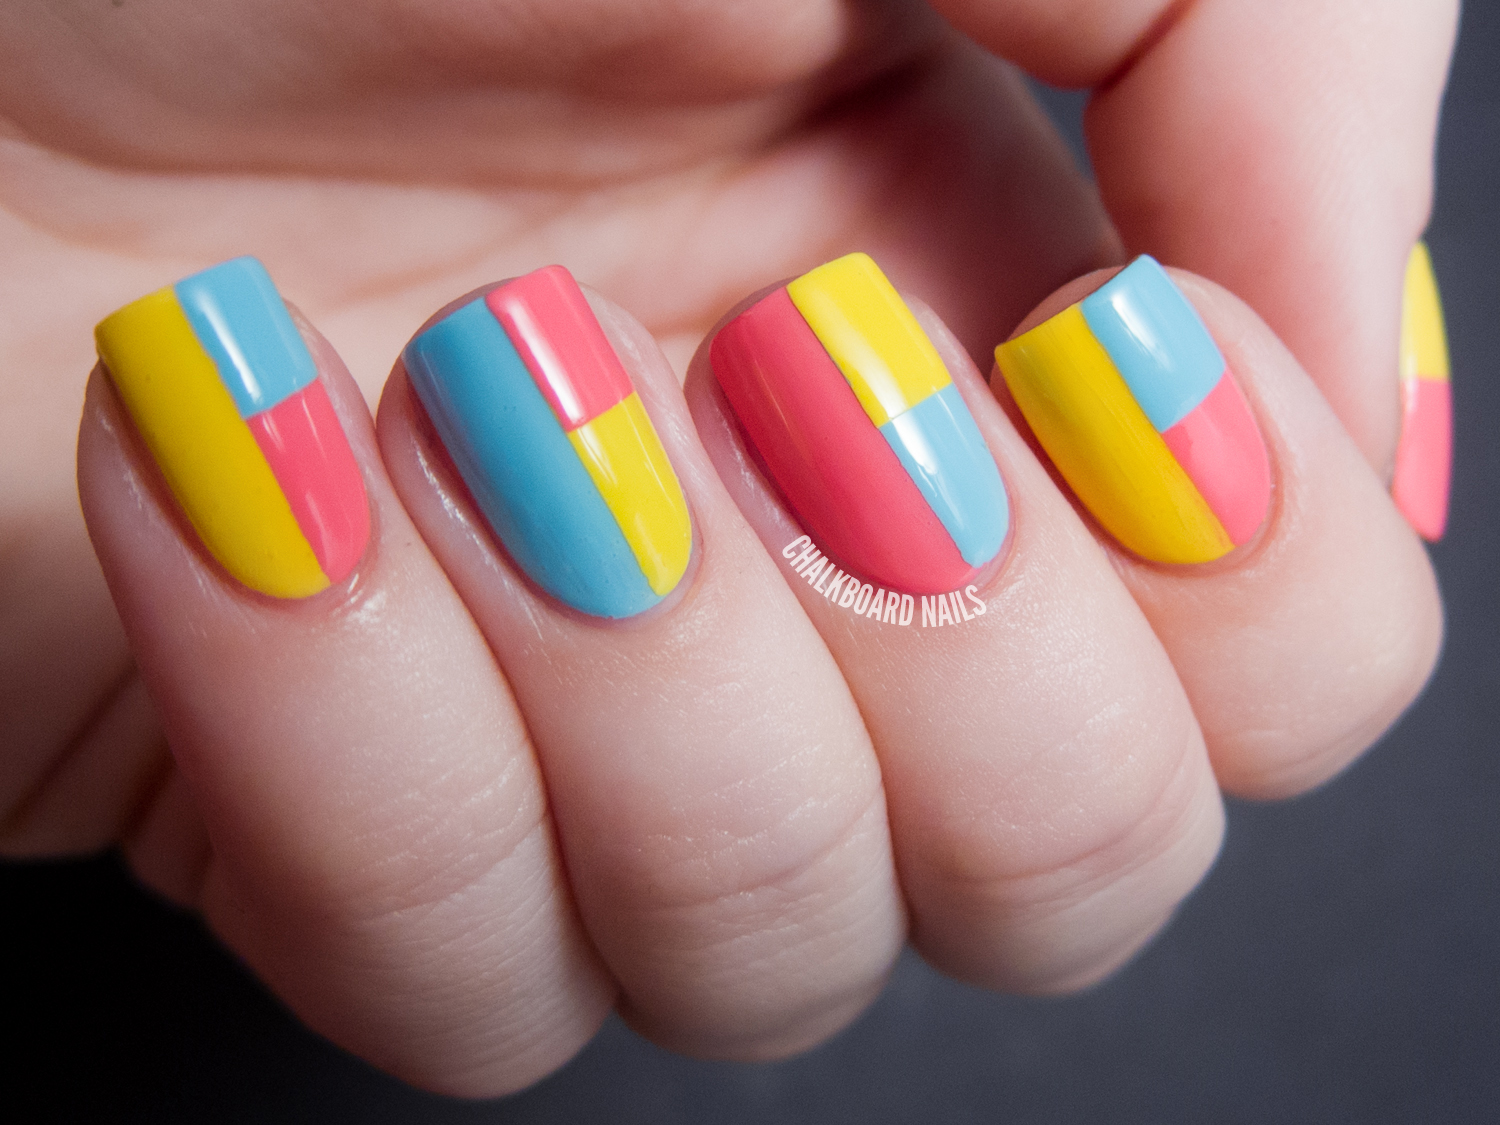 2. How to Create a Color Block Manicure - wide 4